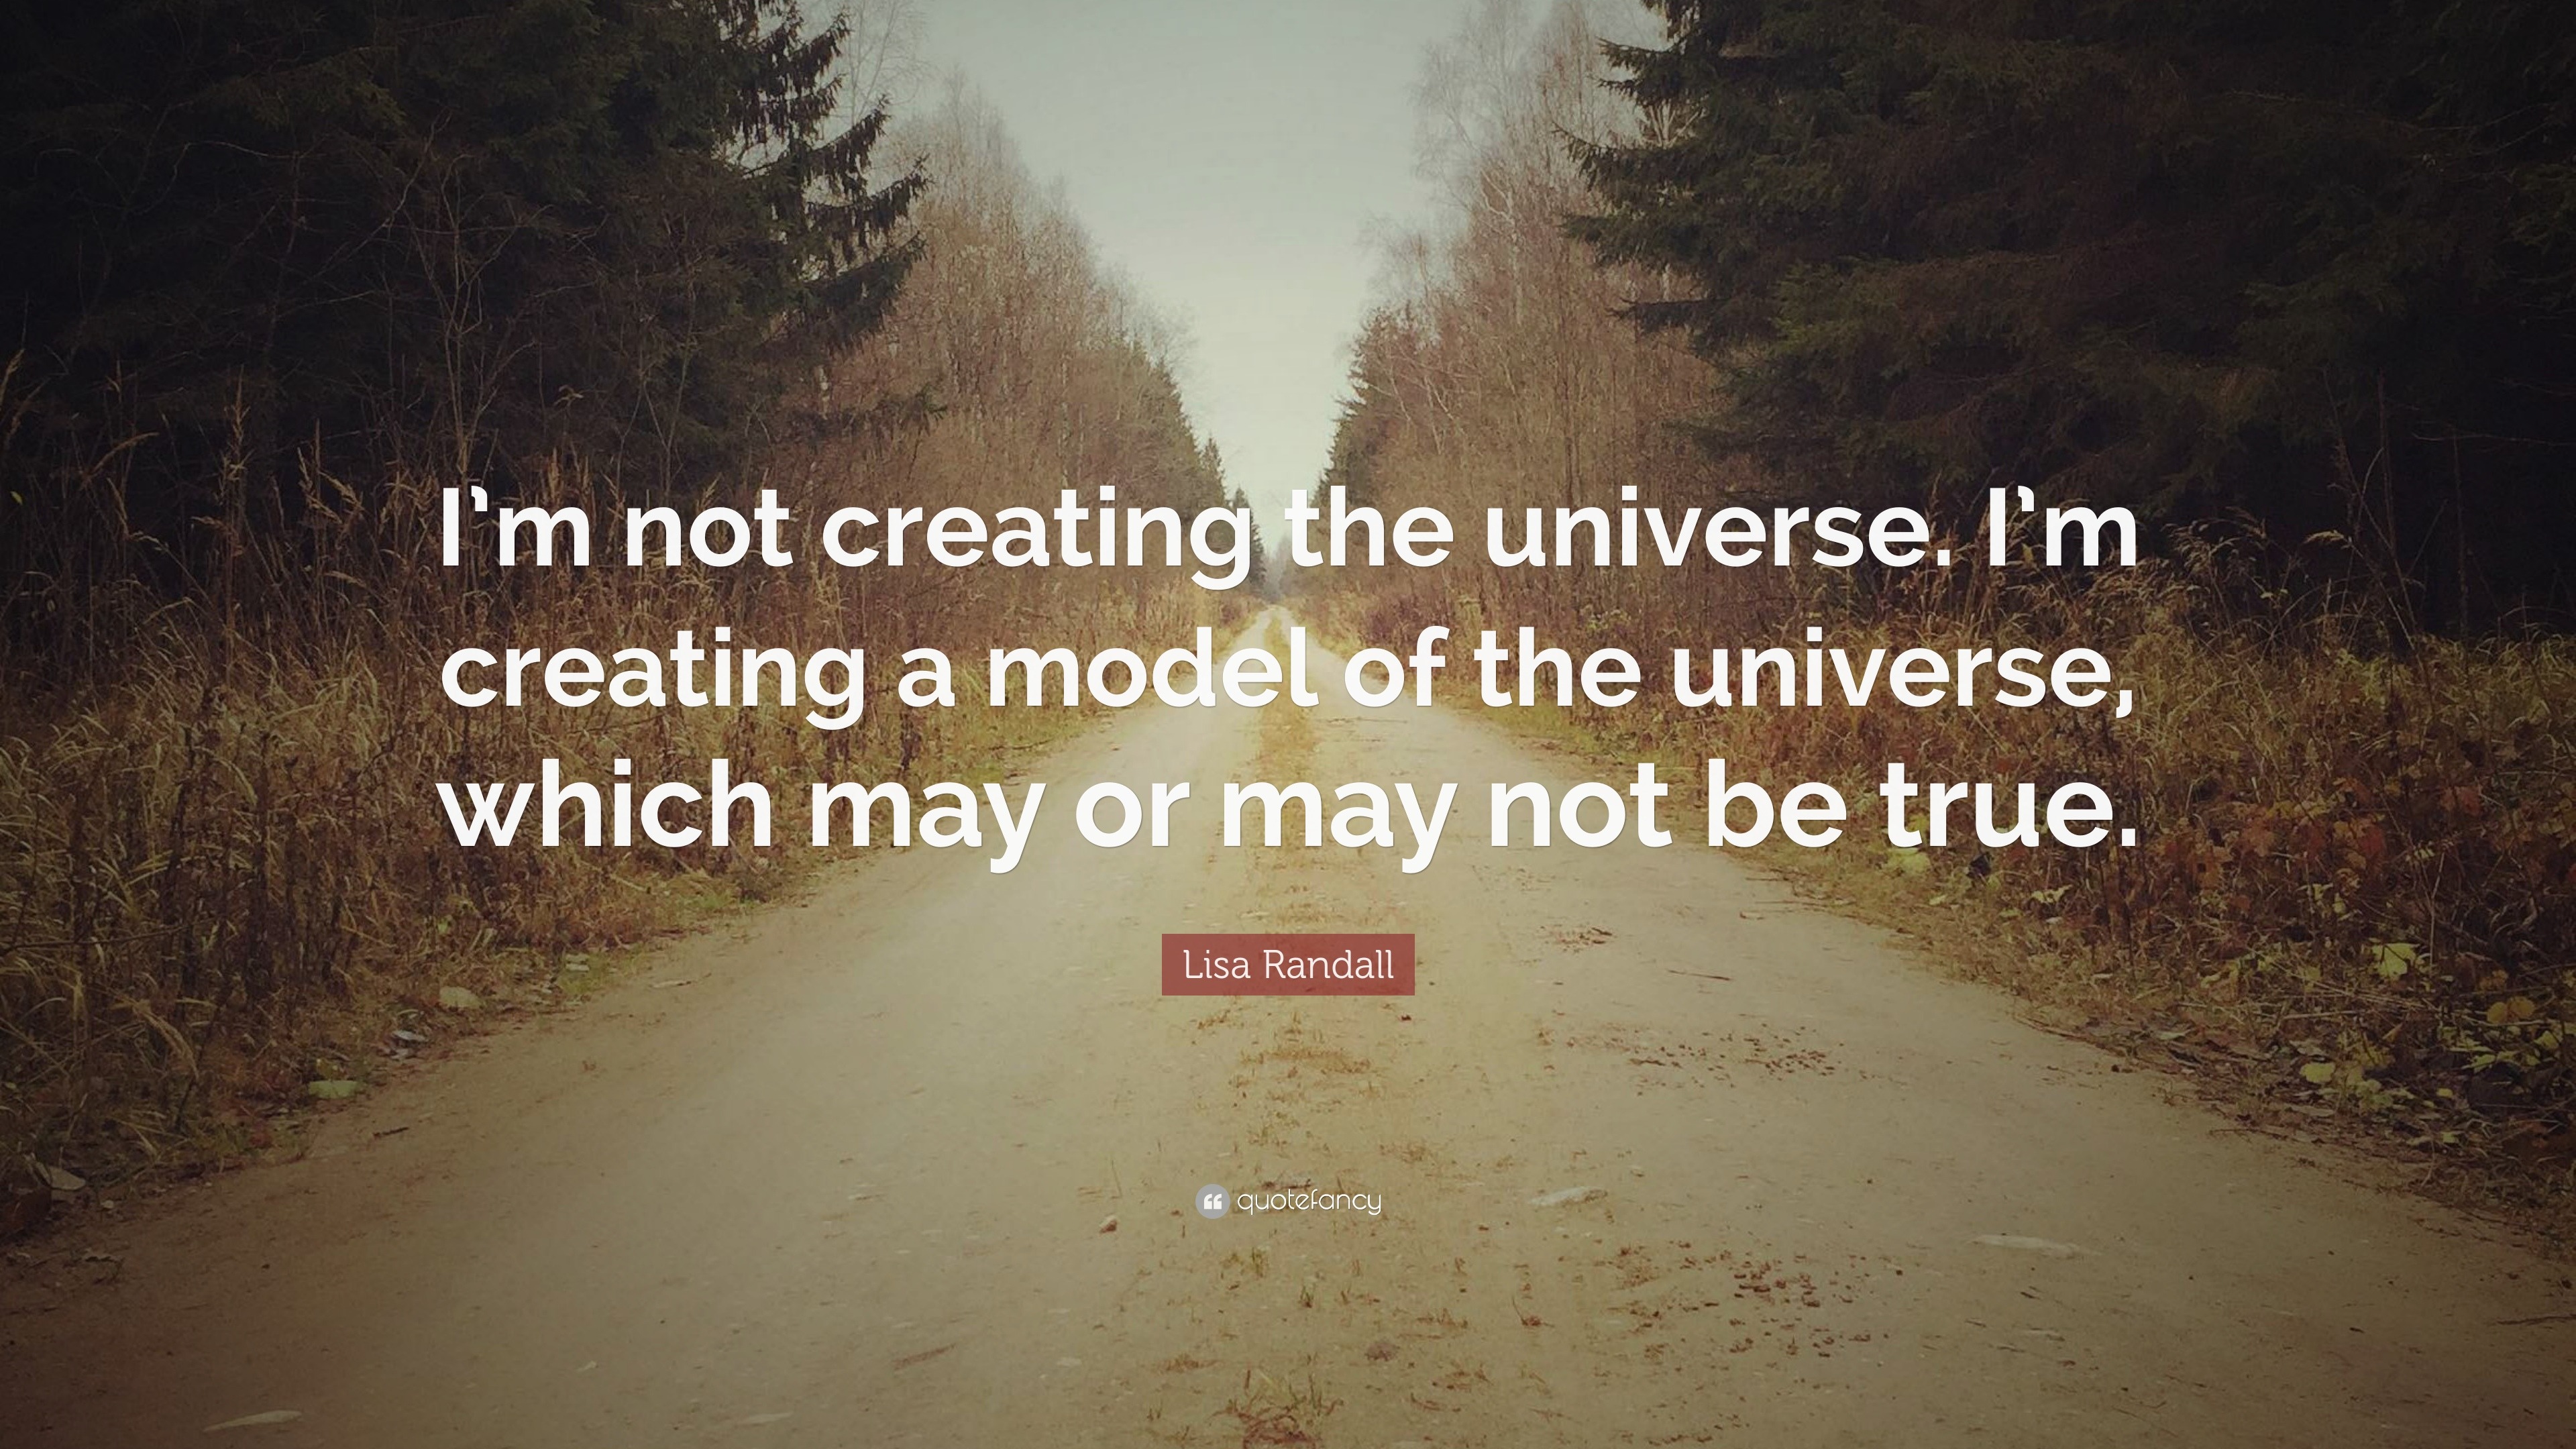 Lisa Randall Quote: “I’m not creating the universe. I’m creating a ...